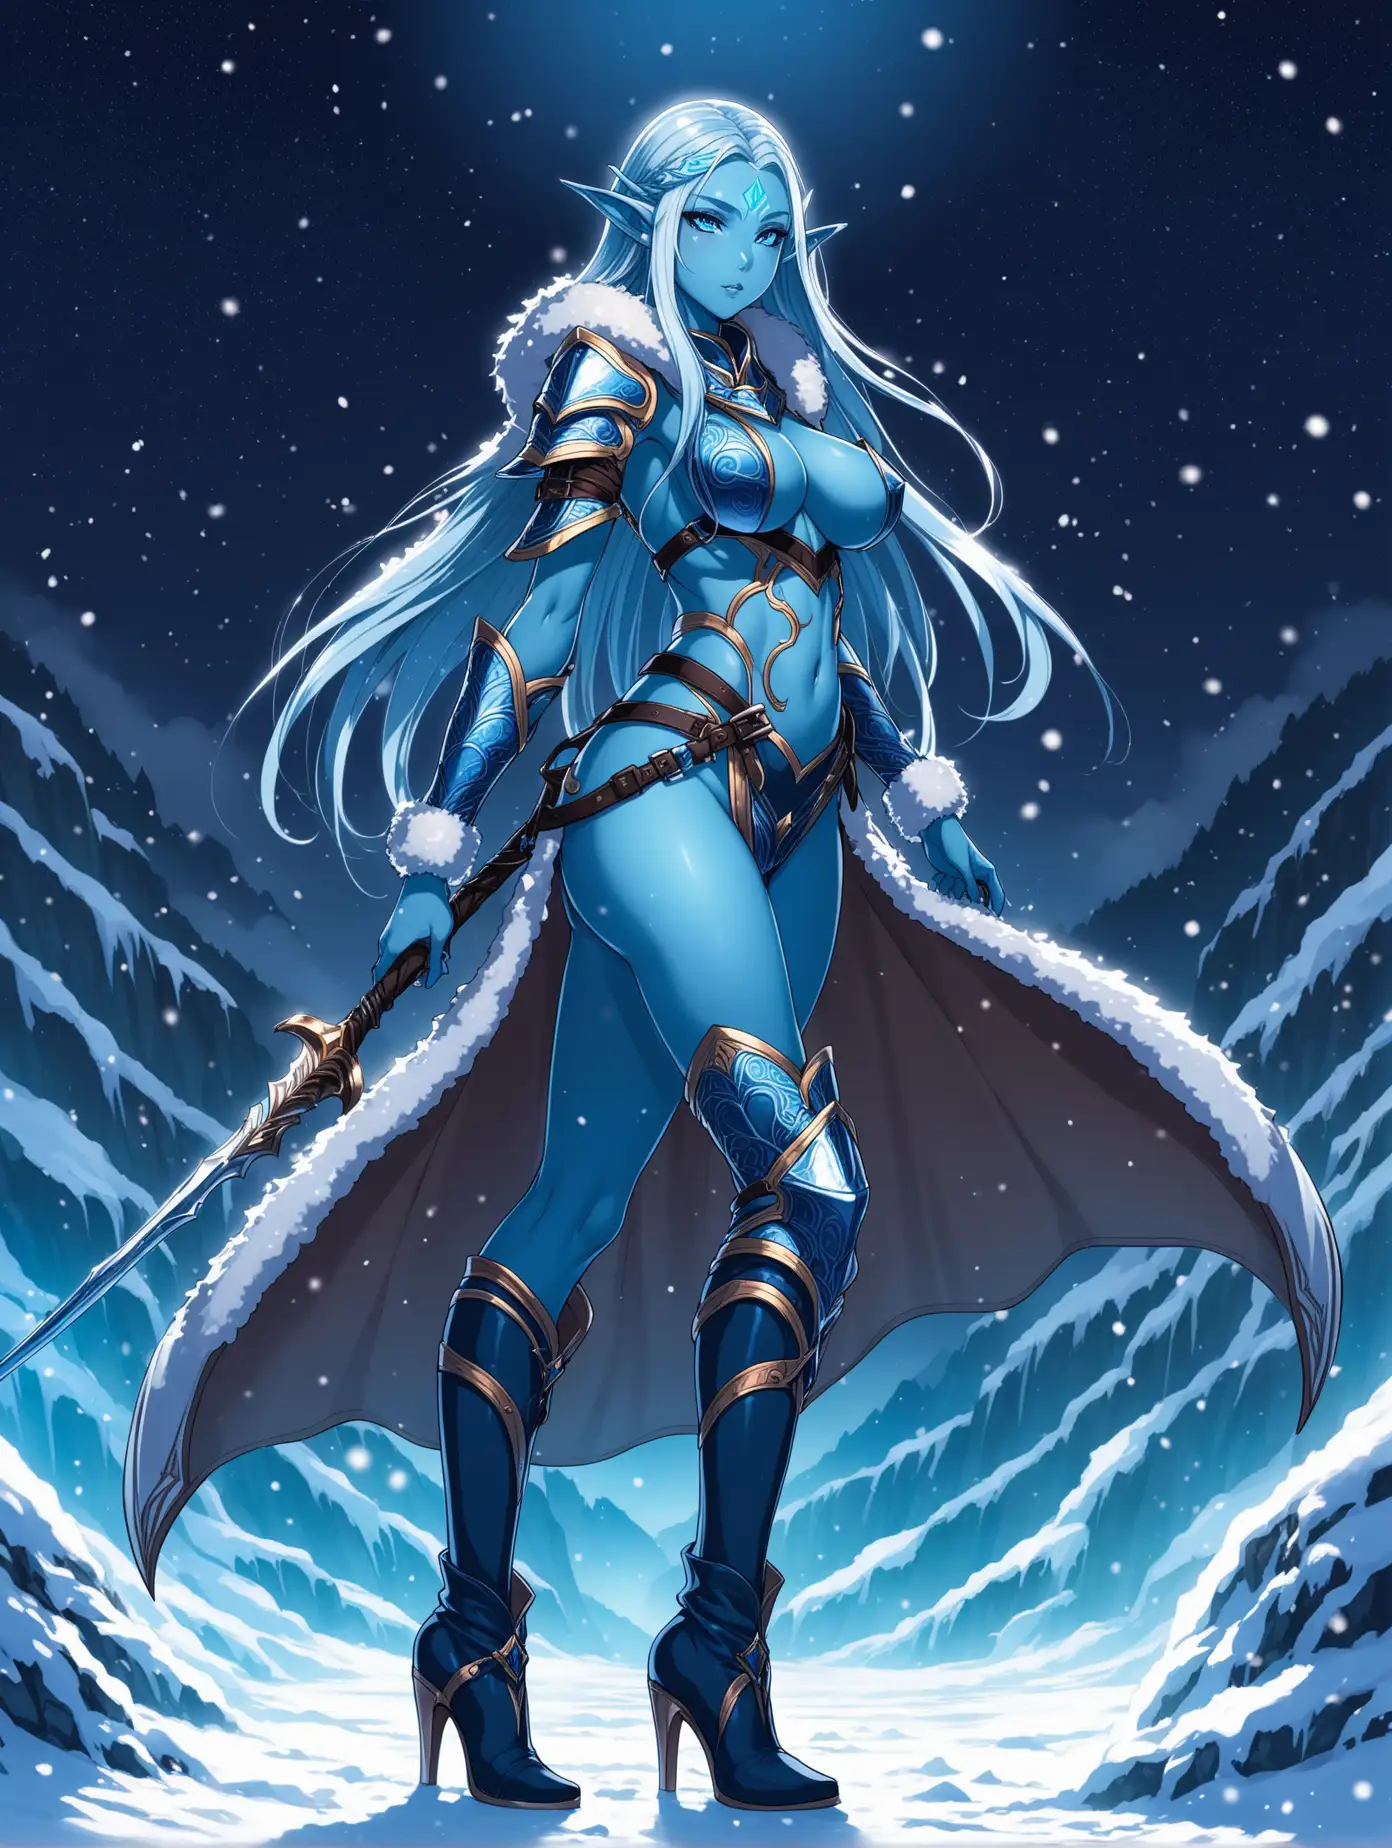 Sensual picture of a hot night elf anime girl, age 25, blue skin, warrior, tall, big ass, epic winter outfit, wearing high heels boots